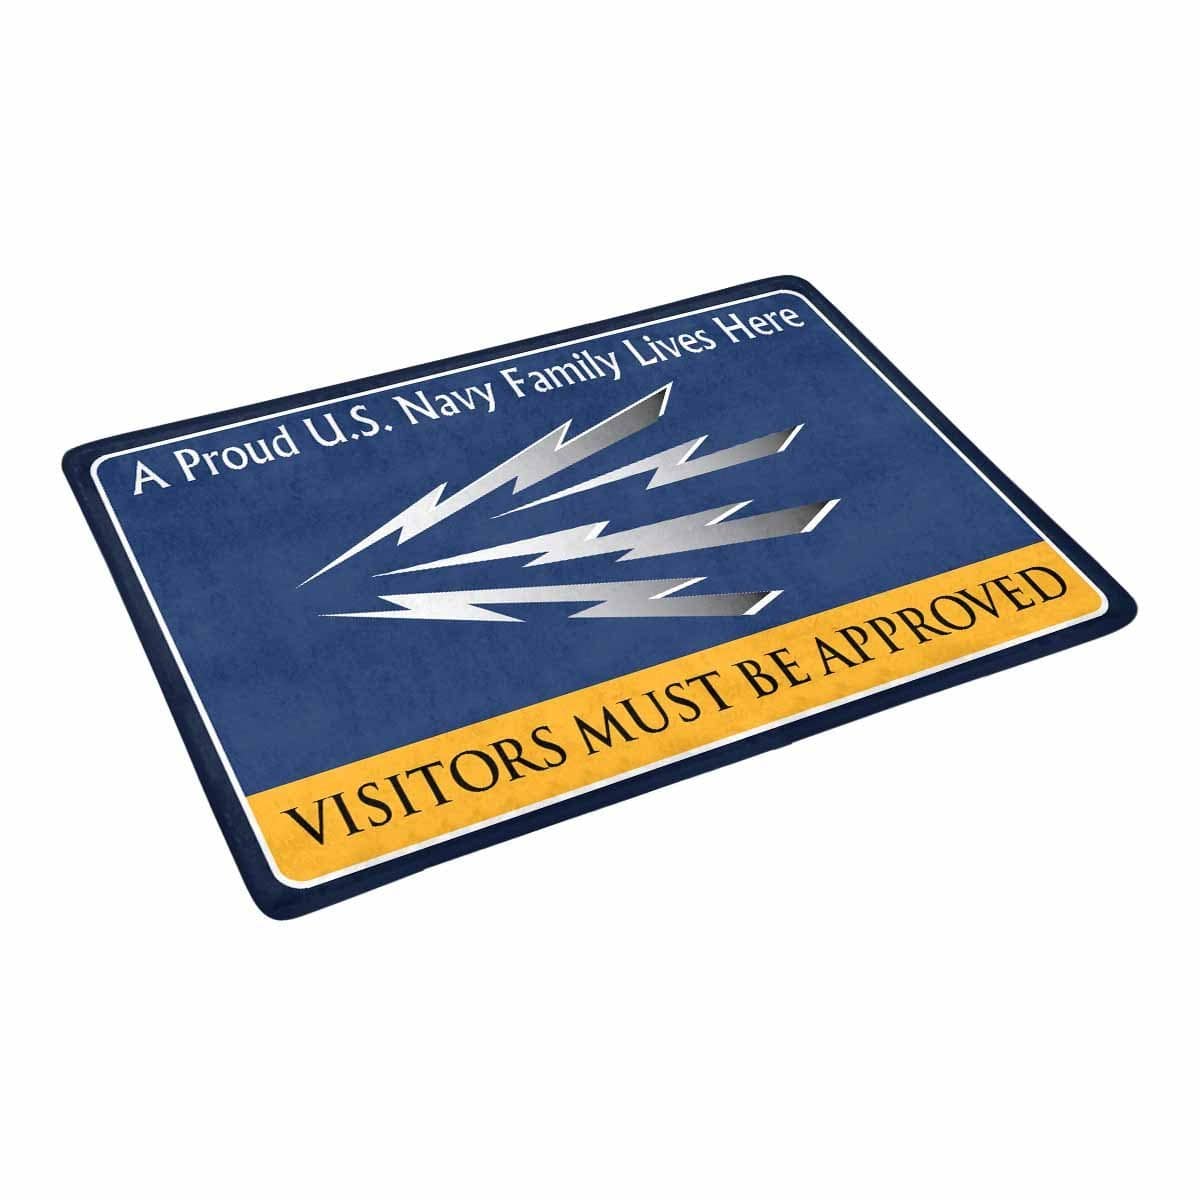 U.S Navy Radioman Navy RM Family Doormat - Visitors must be approved (23,6 inches x 15,7 inches)-Doormat-Navy-Rate-Veterans Nation